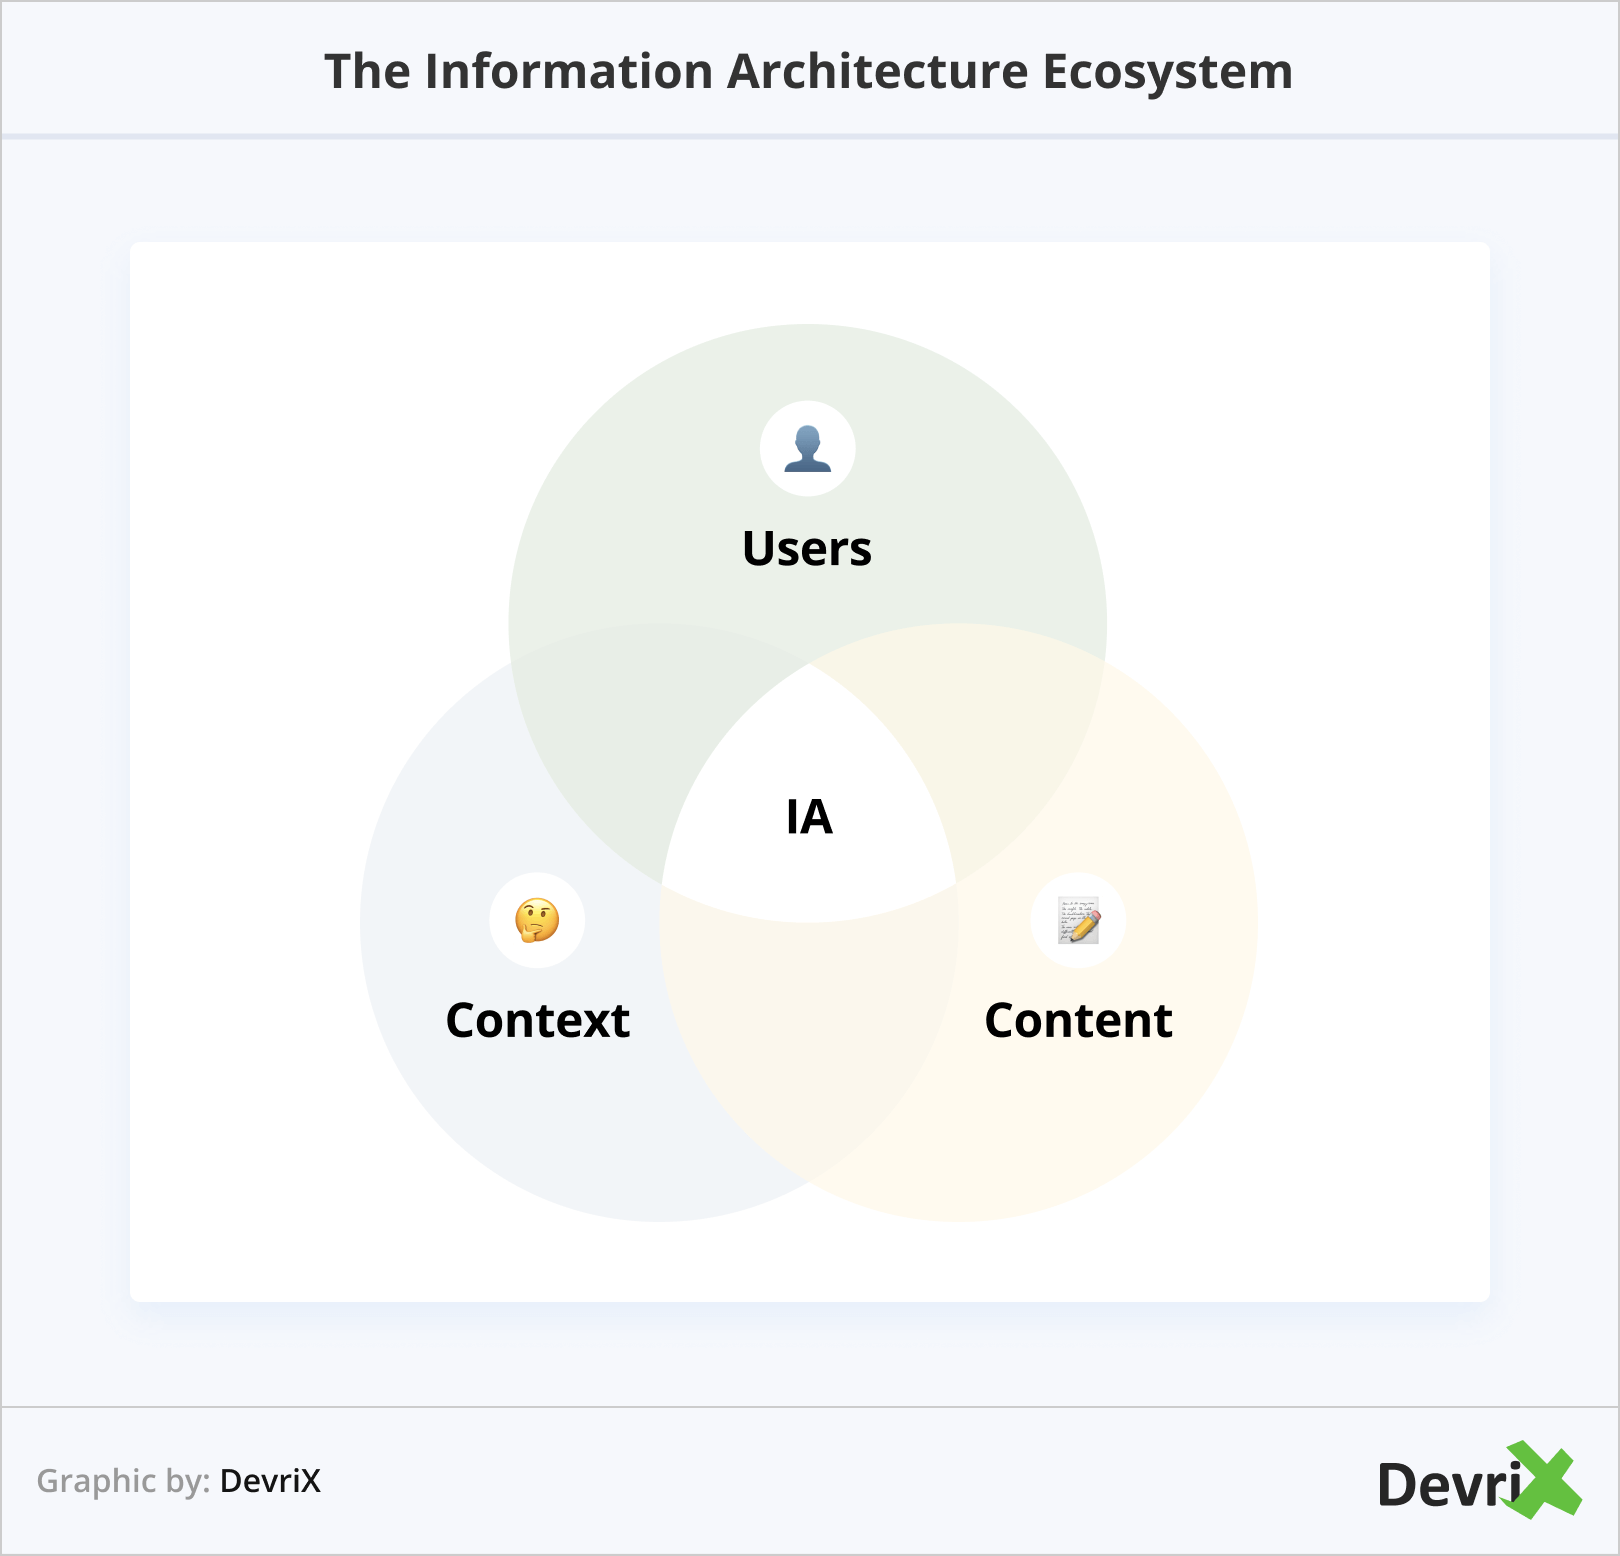 The Information Architecture Ecosystem